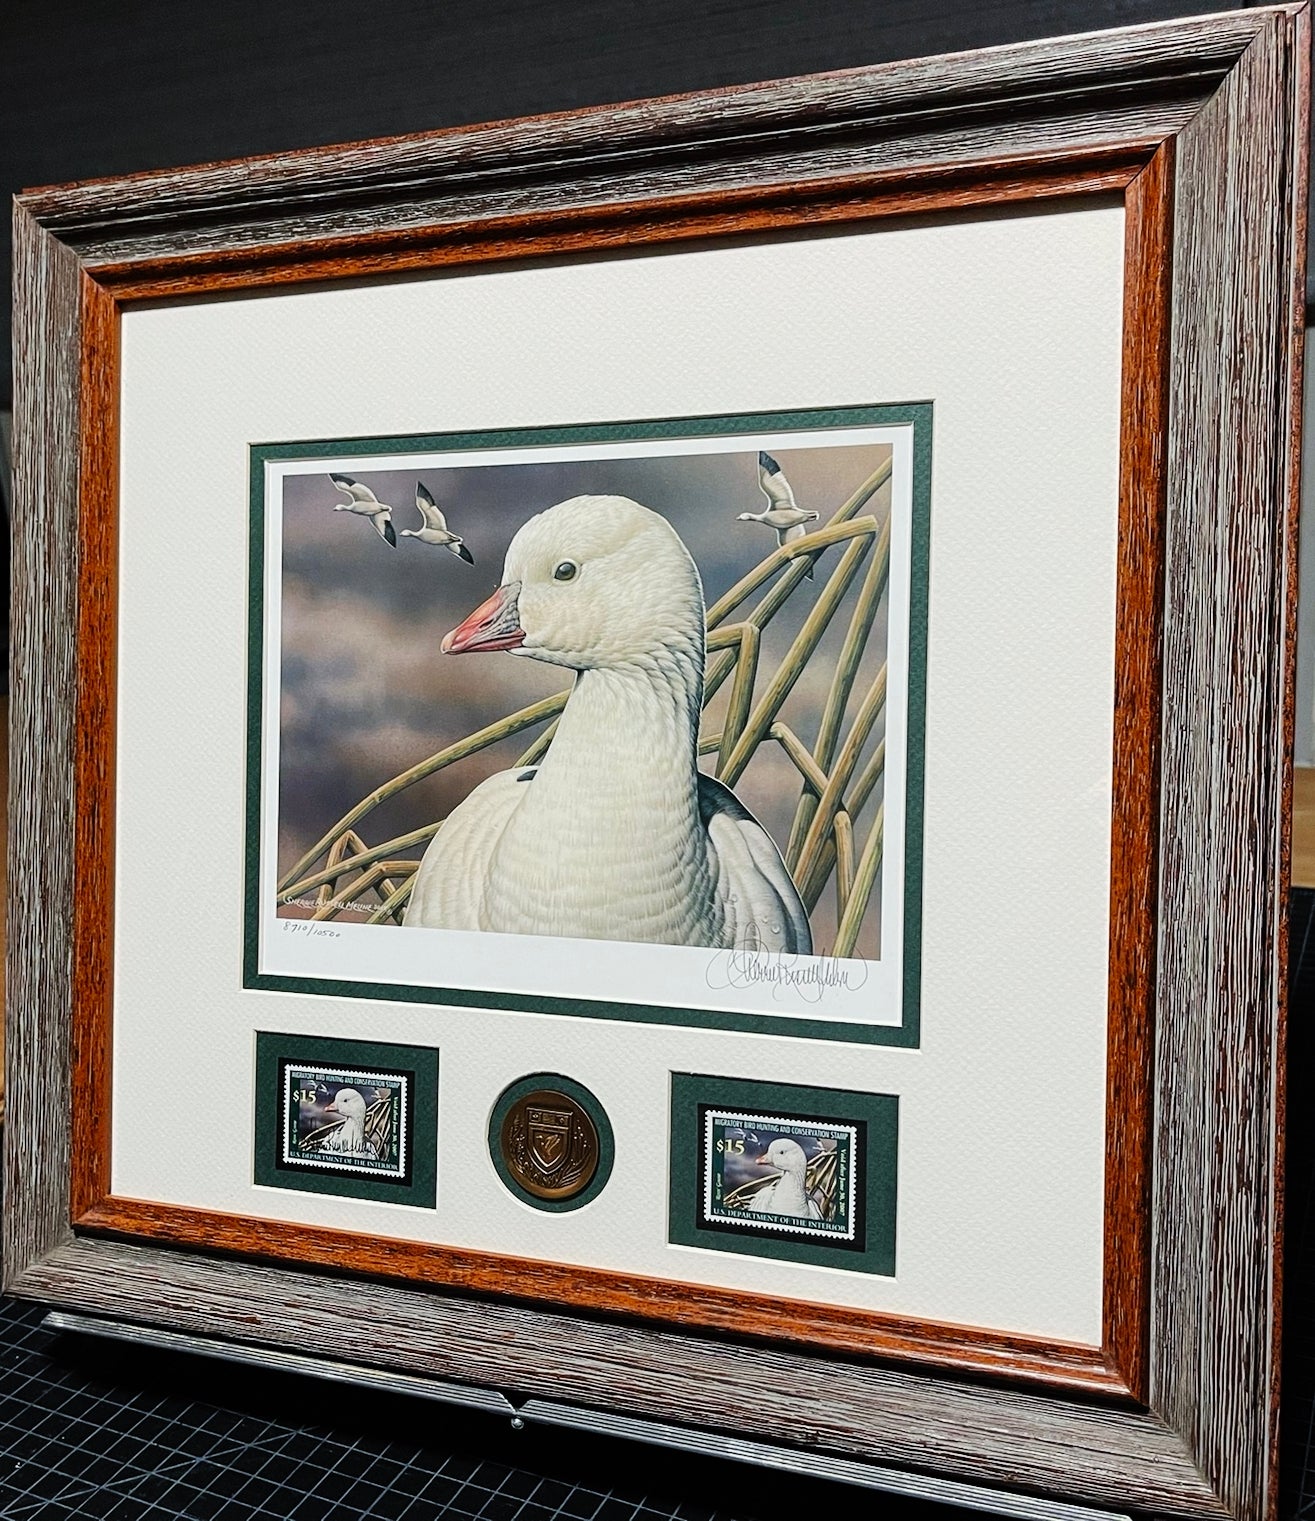 Sherrie Russell Meline - 2006 Federal Duck Stamp Print Gold Medallion Edition With Double Stamps - Brand New Custom Sporting Frame